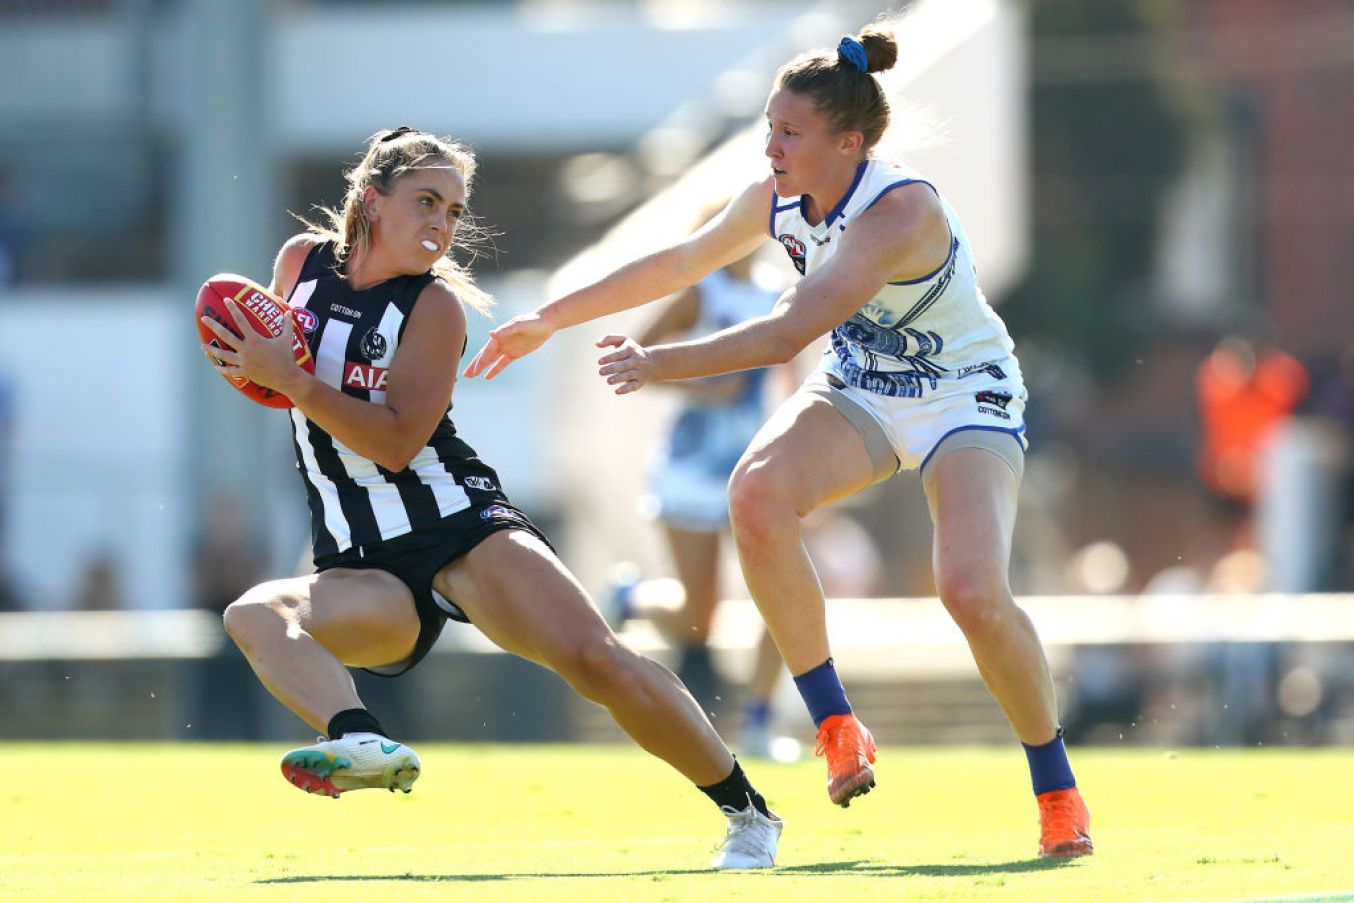 Aishling Sheridan (Cavan) Of The Magpies Runs With The Ball Under Defensive Pressure From Tahlia Randall (North Melbourne Kangaroos). (Photo By Kelly Defina/Afl Photos/Via Getty Images)